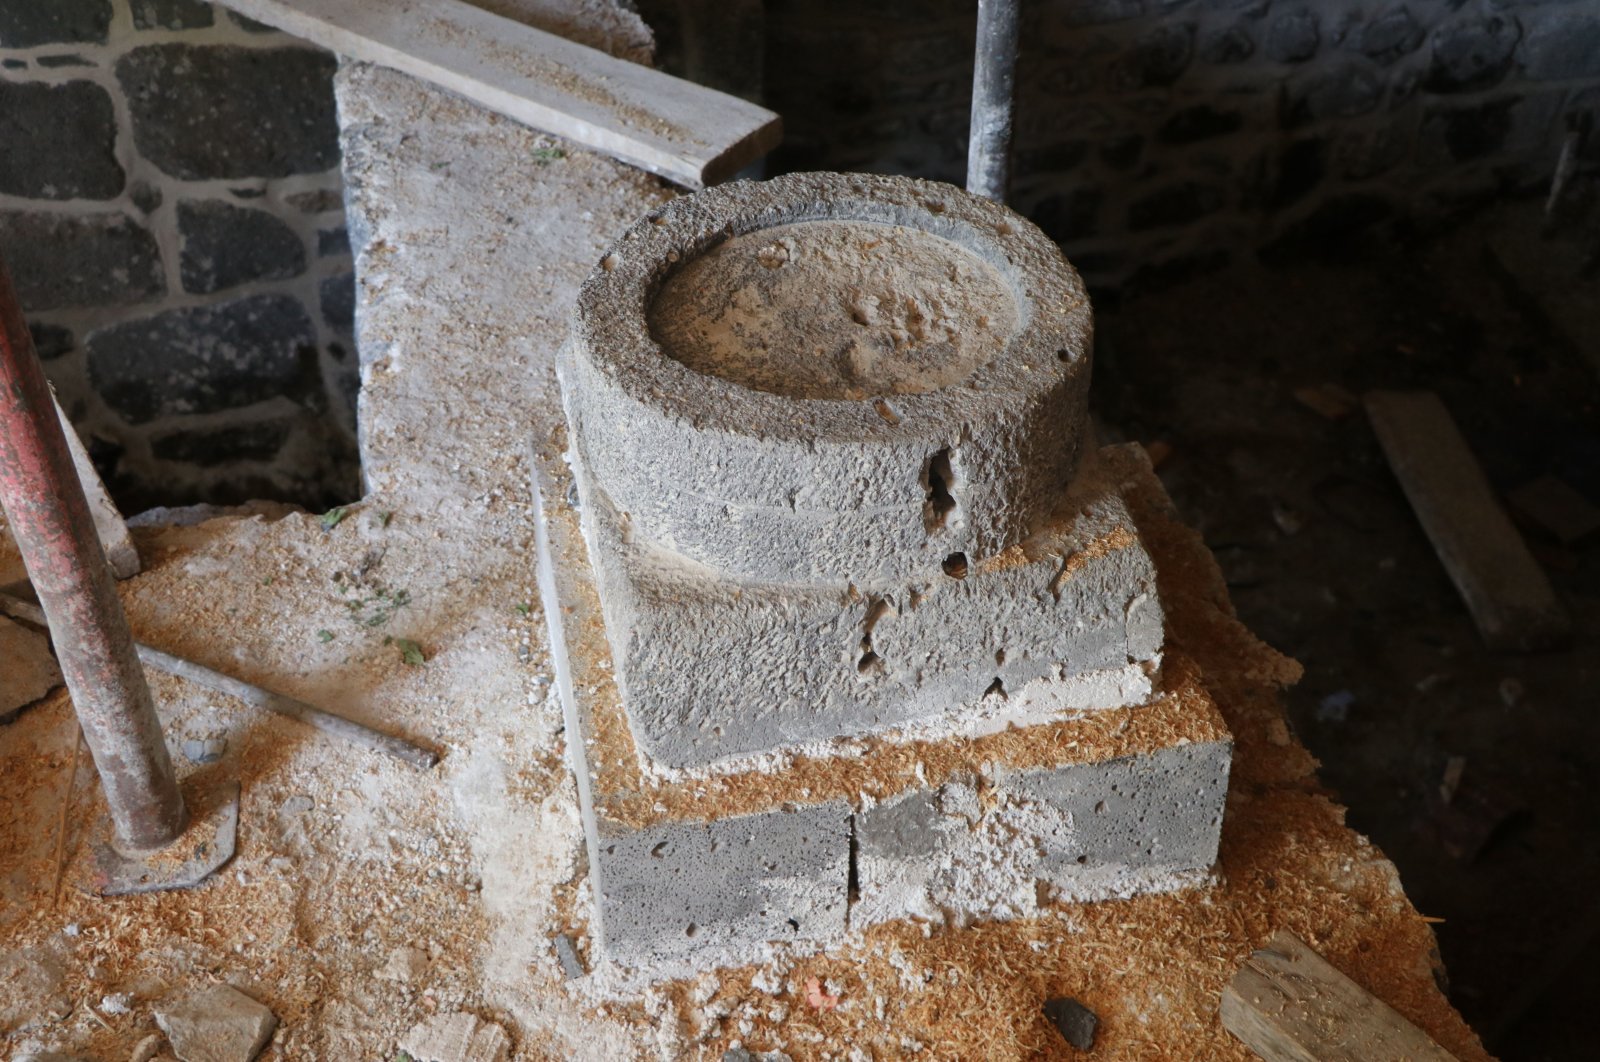  The 200-year-old water mill has been expropriated and restoration work has begun, June 17, 2022. (DHA Photo)